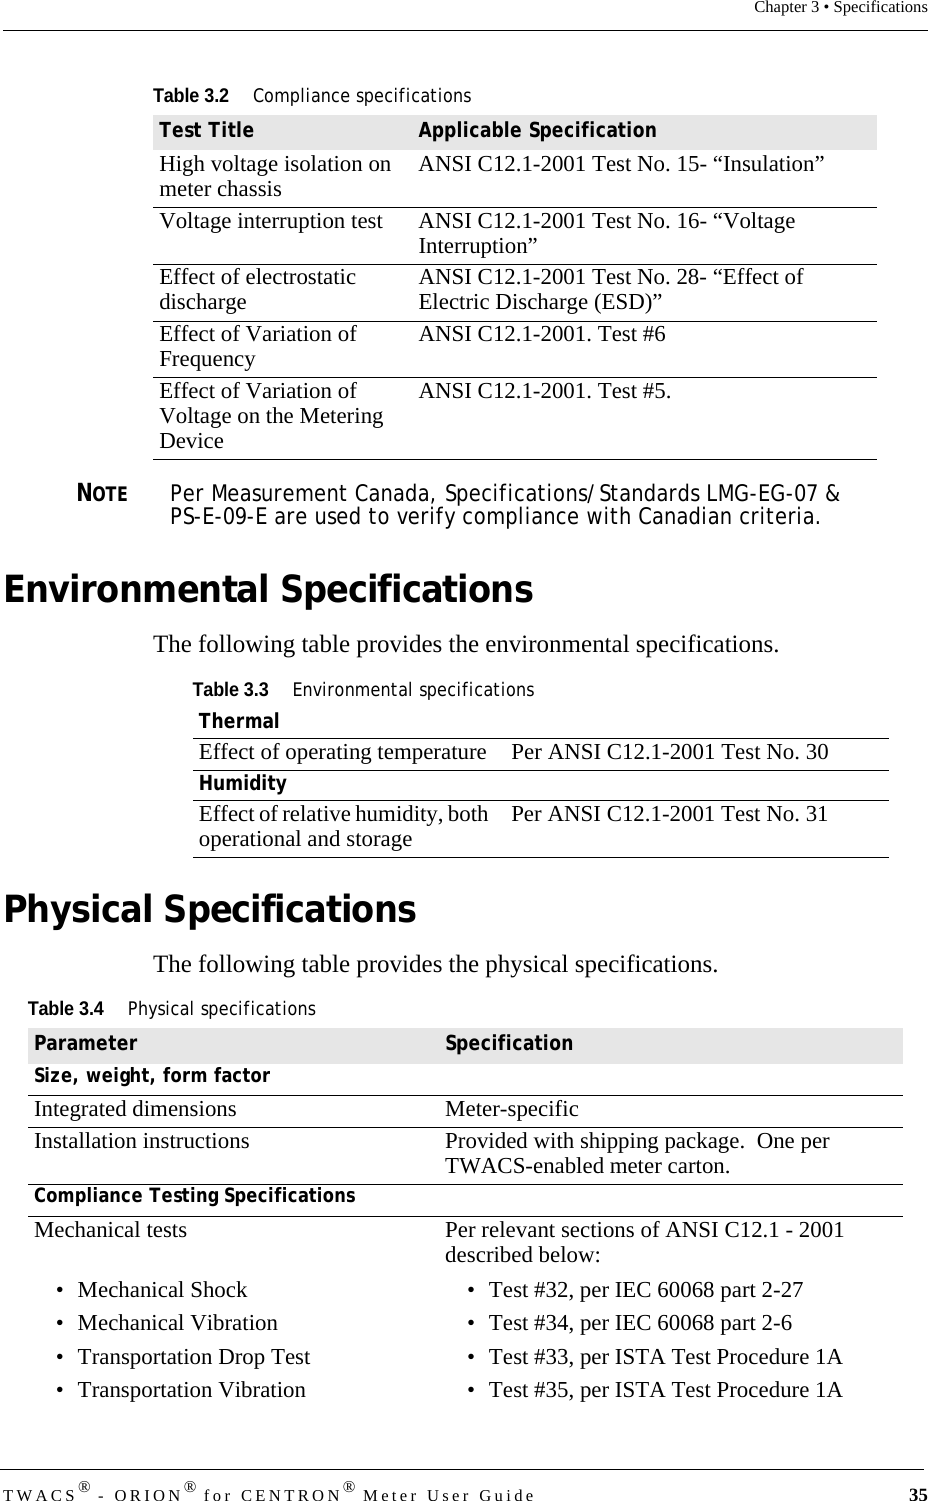 TWACS® - ORION® for CENTRON® Meter User Guide 35Chapter 3 • SpecificationsNOTEPer Measurement Canada, Specifications/Standards LMG-EG-07 &amp; PS-E-09-E are used to verify compliance with Canadian criteria. Environmental SpecificationsThe following table provides the environmental specifications.Physical SpecificationsThe following table provides the physical specifications.High voltage isolation on meter chassis ANSI C12.1-2001 Test No. 15- “Insulation”Voltage interruption test ANSI C12.1-2001 Test No. 16- “Voltage Interruption”Effect of electrostatic discharge ANSI C12.1-2001 Test No. 28- “Effect of Electric Discharge (ESD)”Effect of Variation of Frequency ANSI C12.1-2001. Test #6Effect of Variation of Voltage on the Metering DeviceANSI C12.1-2001. Test #5.Table 3.2Compliance specificationsTest Title Applicable SpecificationTable 3.3Environmental specificationsThermalEffect of operating temperature  Per ANSI C12.1-2001 Test No. 30HumidityEffect of relative humidity, both operational and storage Per ANSI C12.1-2001 Test No. 31Table 3.4Physical specificationsParameter SpecificationSize, weight, form factorIntegrated dimensions Meter-specificInstallation instructions Provided with shipping package.  One per TWACS-enabled meter carton.Compliance Testing SpecificationsMechanical tests• Mechanical Shock• Mechanical Vibration• Transportation Drop Test• Transportation VibrationPer relevant sections of ANSI C12.1 - 2001 described below:• Test #32, per IEC 60068 part 2-27• Test #34, per IEC 60068 part 2-6• Test #33, per ISTA Test Procedure 1A• Test #35, per ISTA Test Procedure 1A